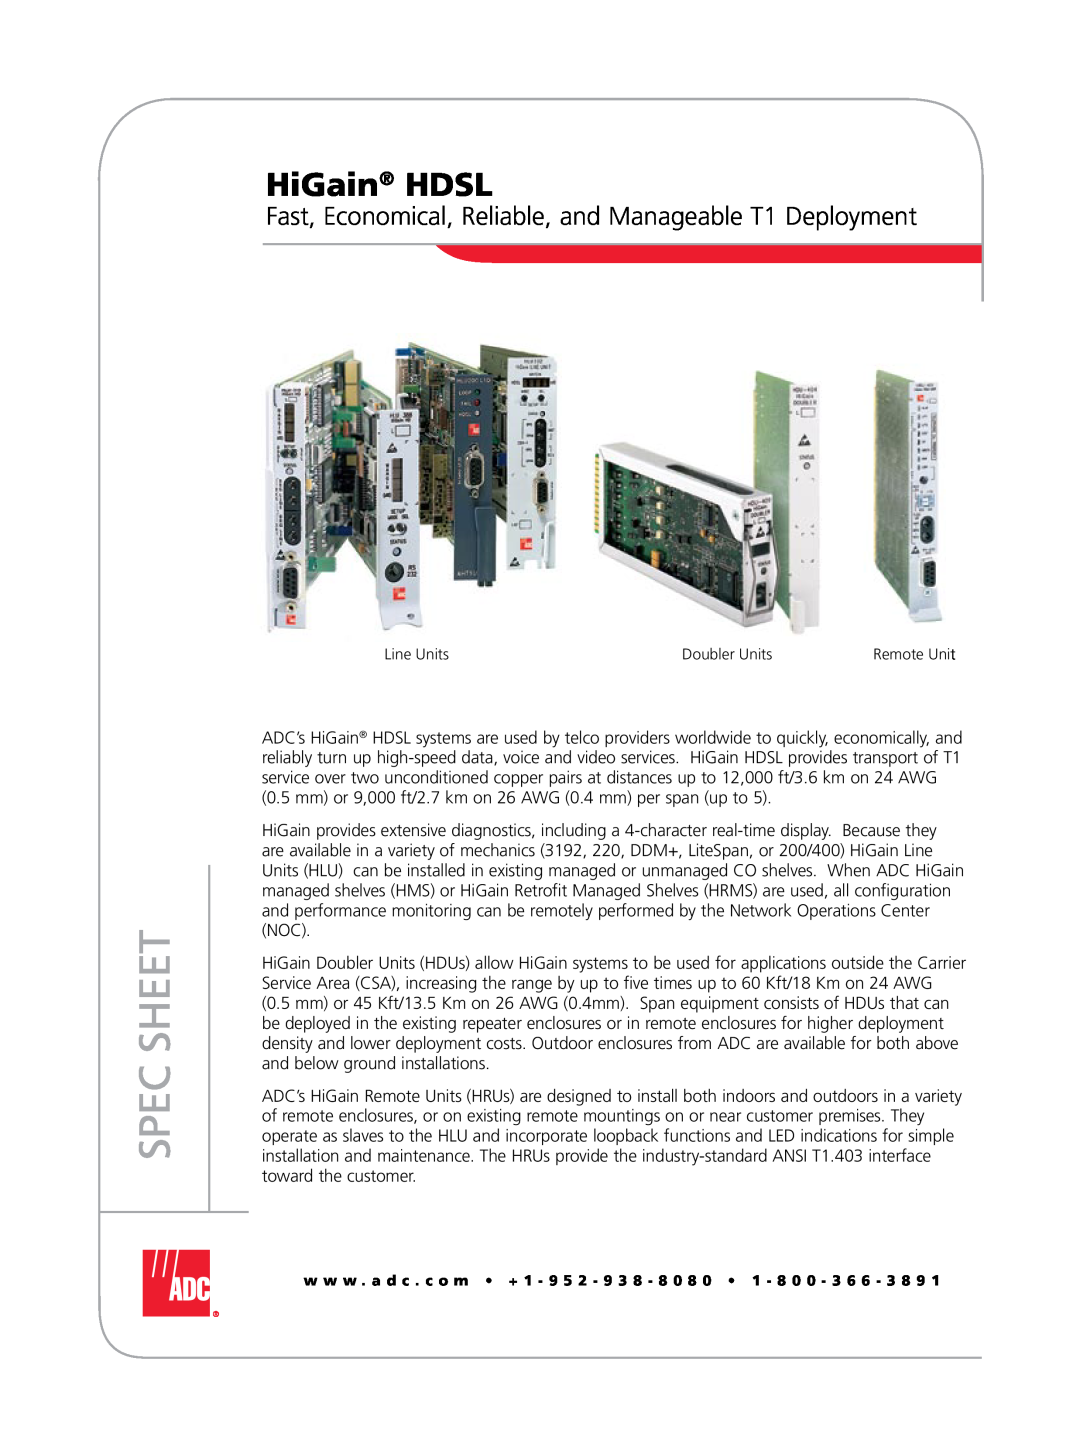 ADC manual HiGain HDSL, Fast, Economical, Reliable, and Manageable T1 Deployment, Spec Sheet 